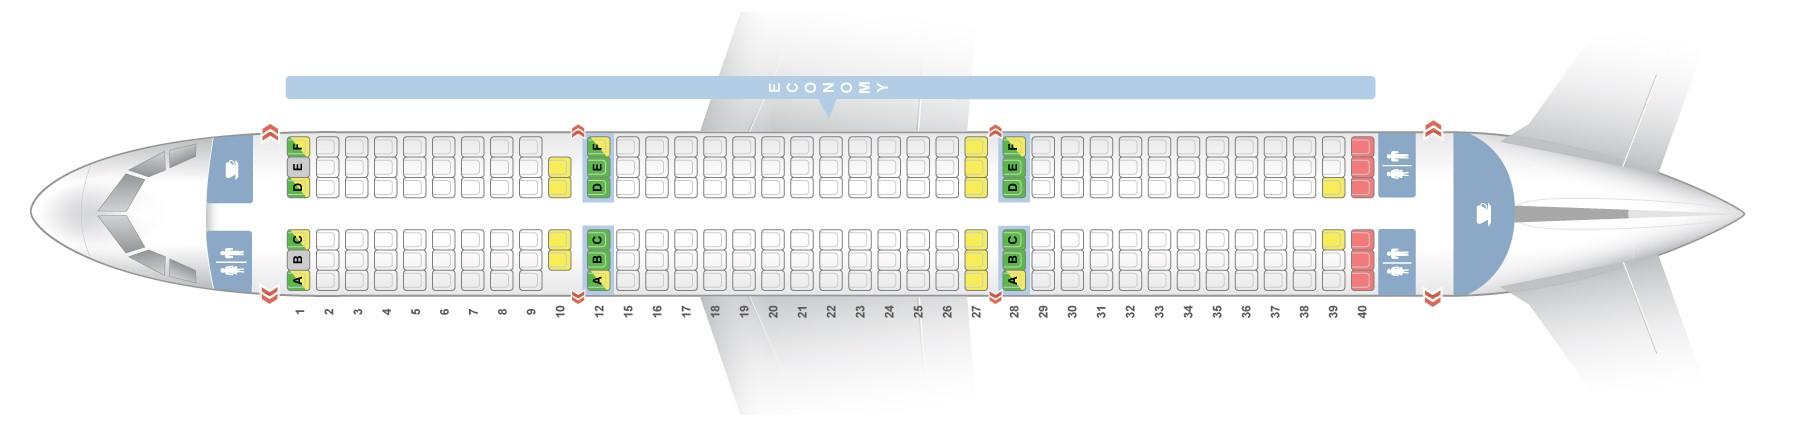 Seat map Airbus A321200 "Vueling". Best seats in the plane